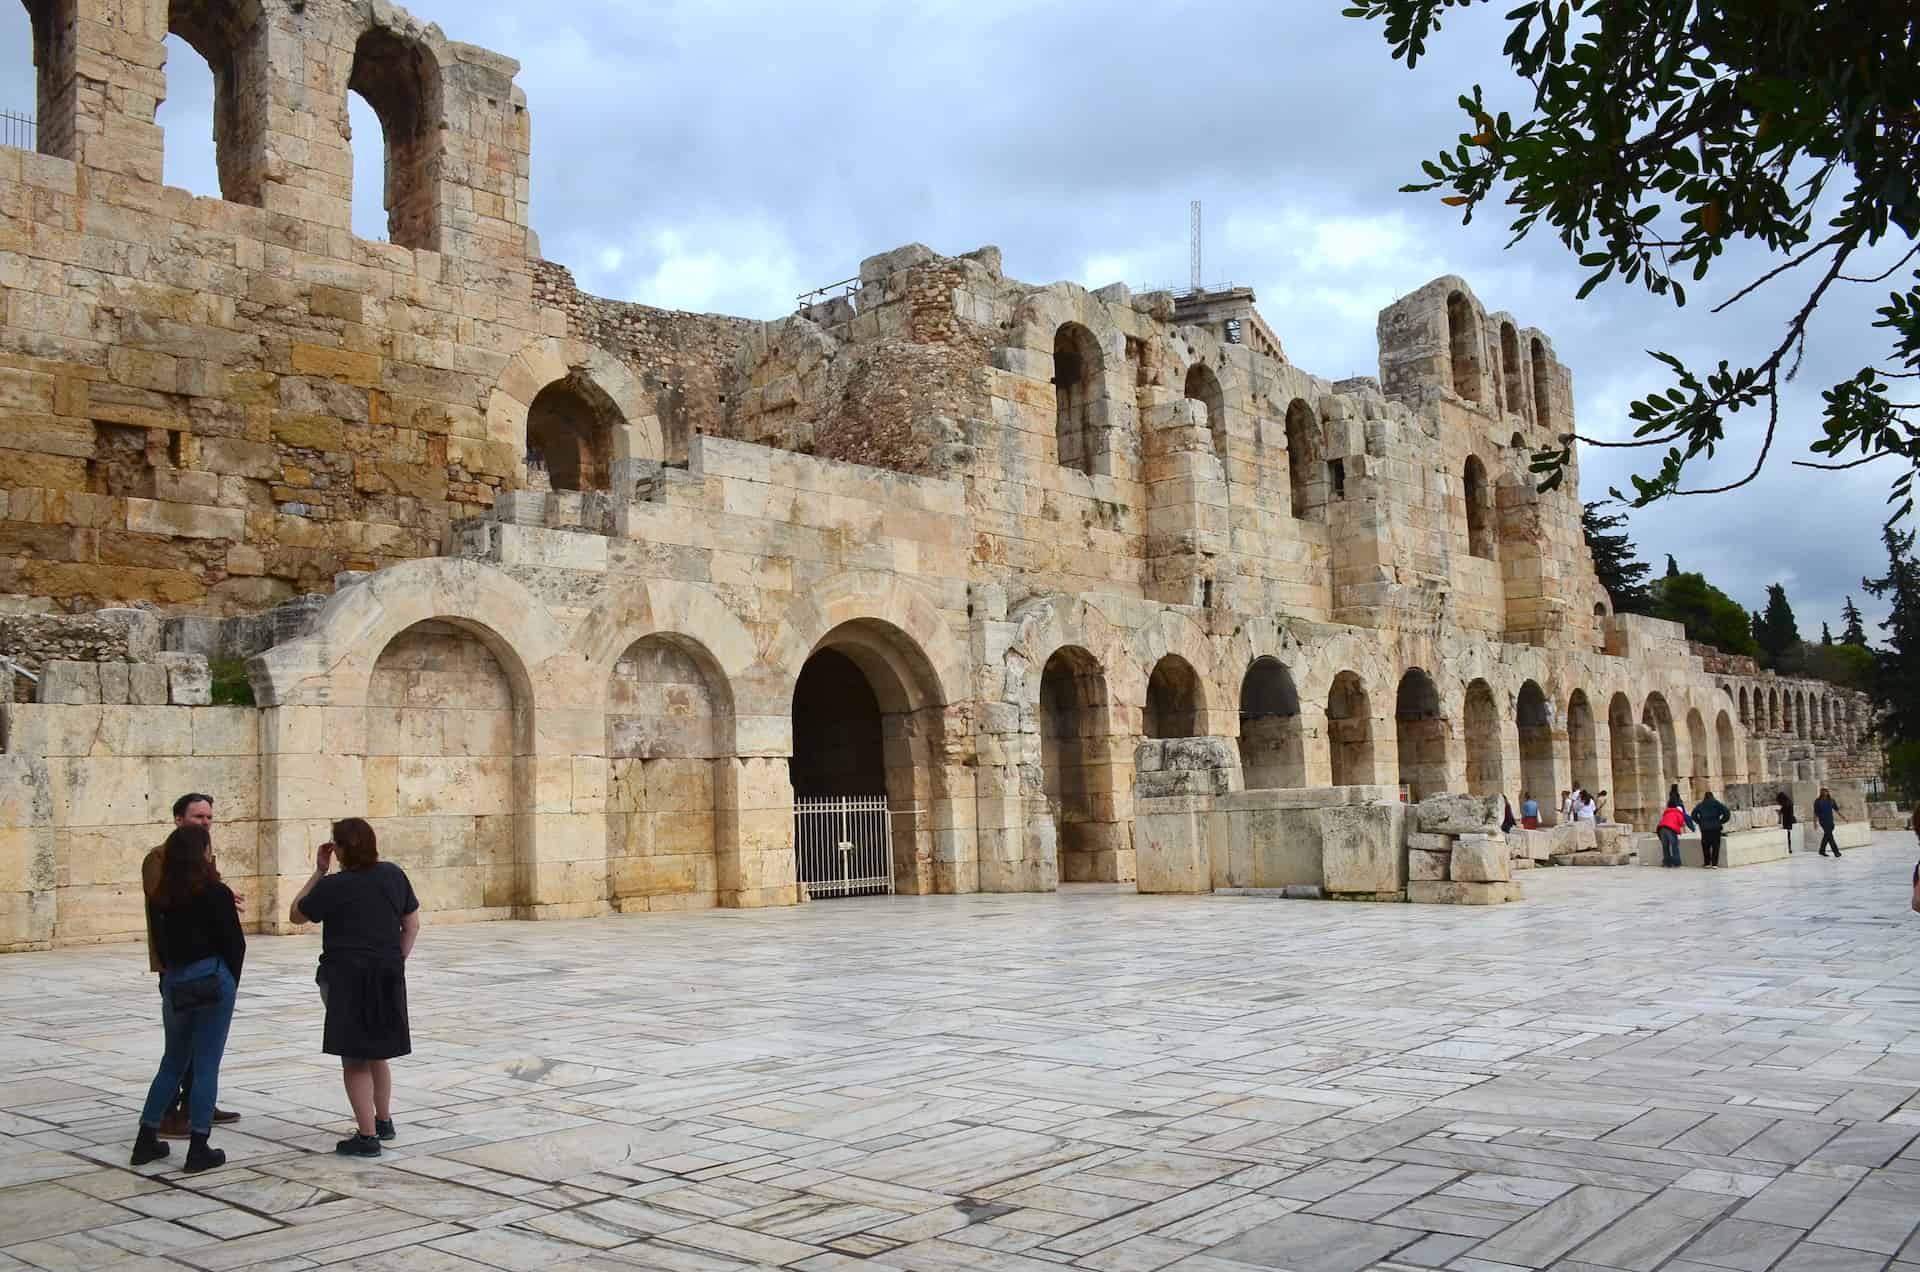 Façade of the Odeon of Herodes Atticus on the south slope on the Acropolis in Athens, Greece